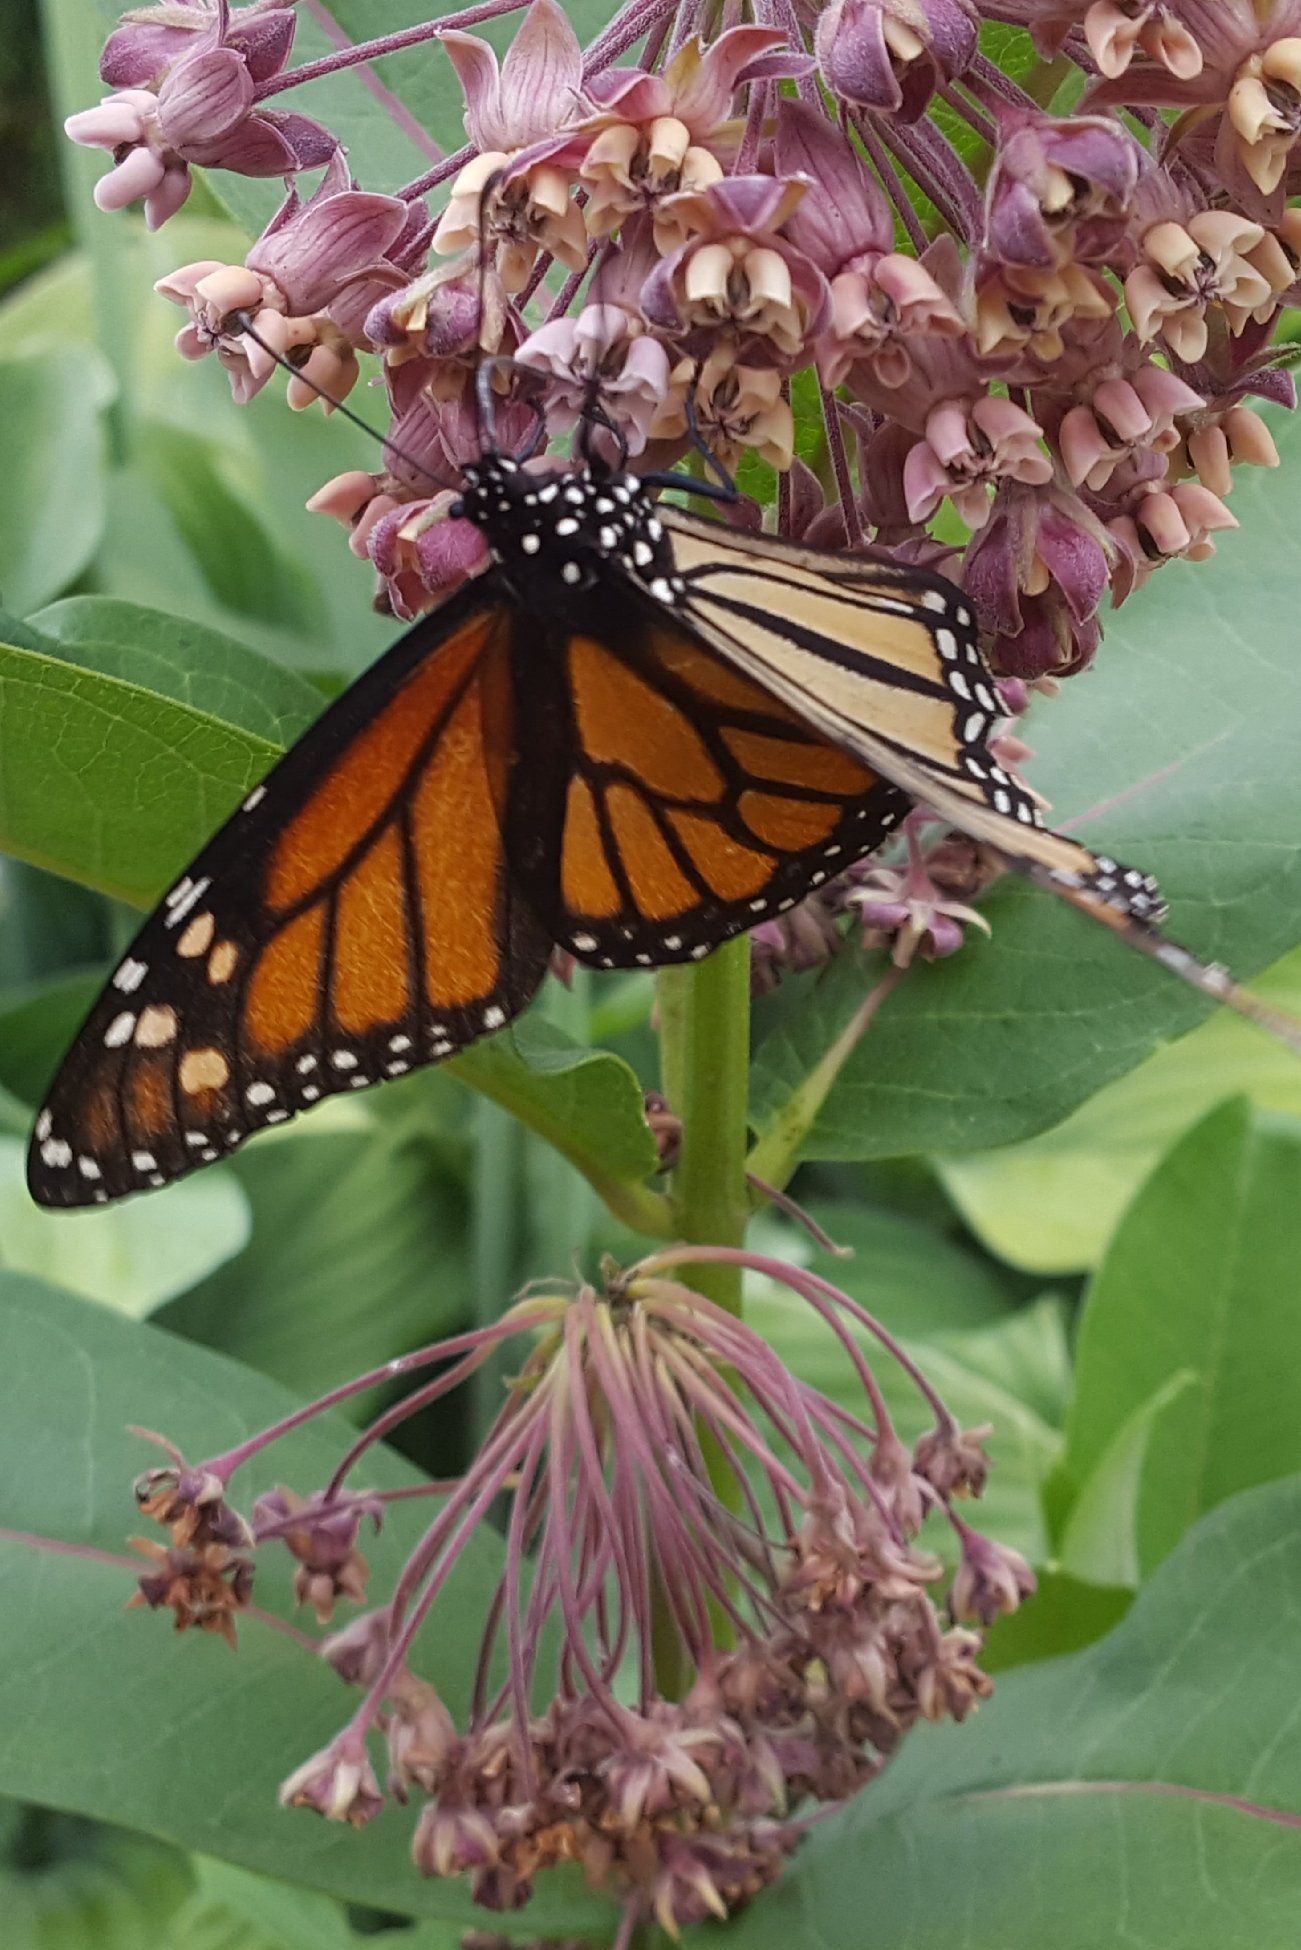 Next Happening: Monarch Butterfly sighting